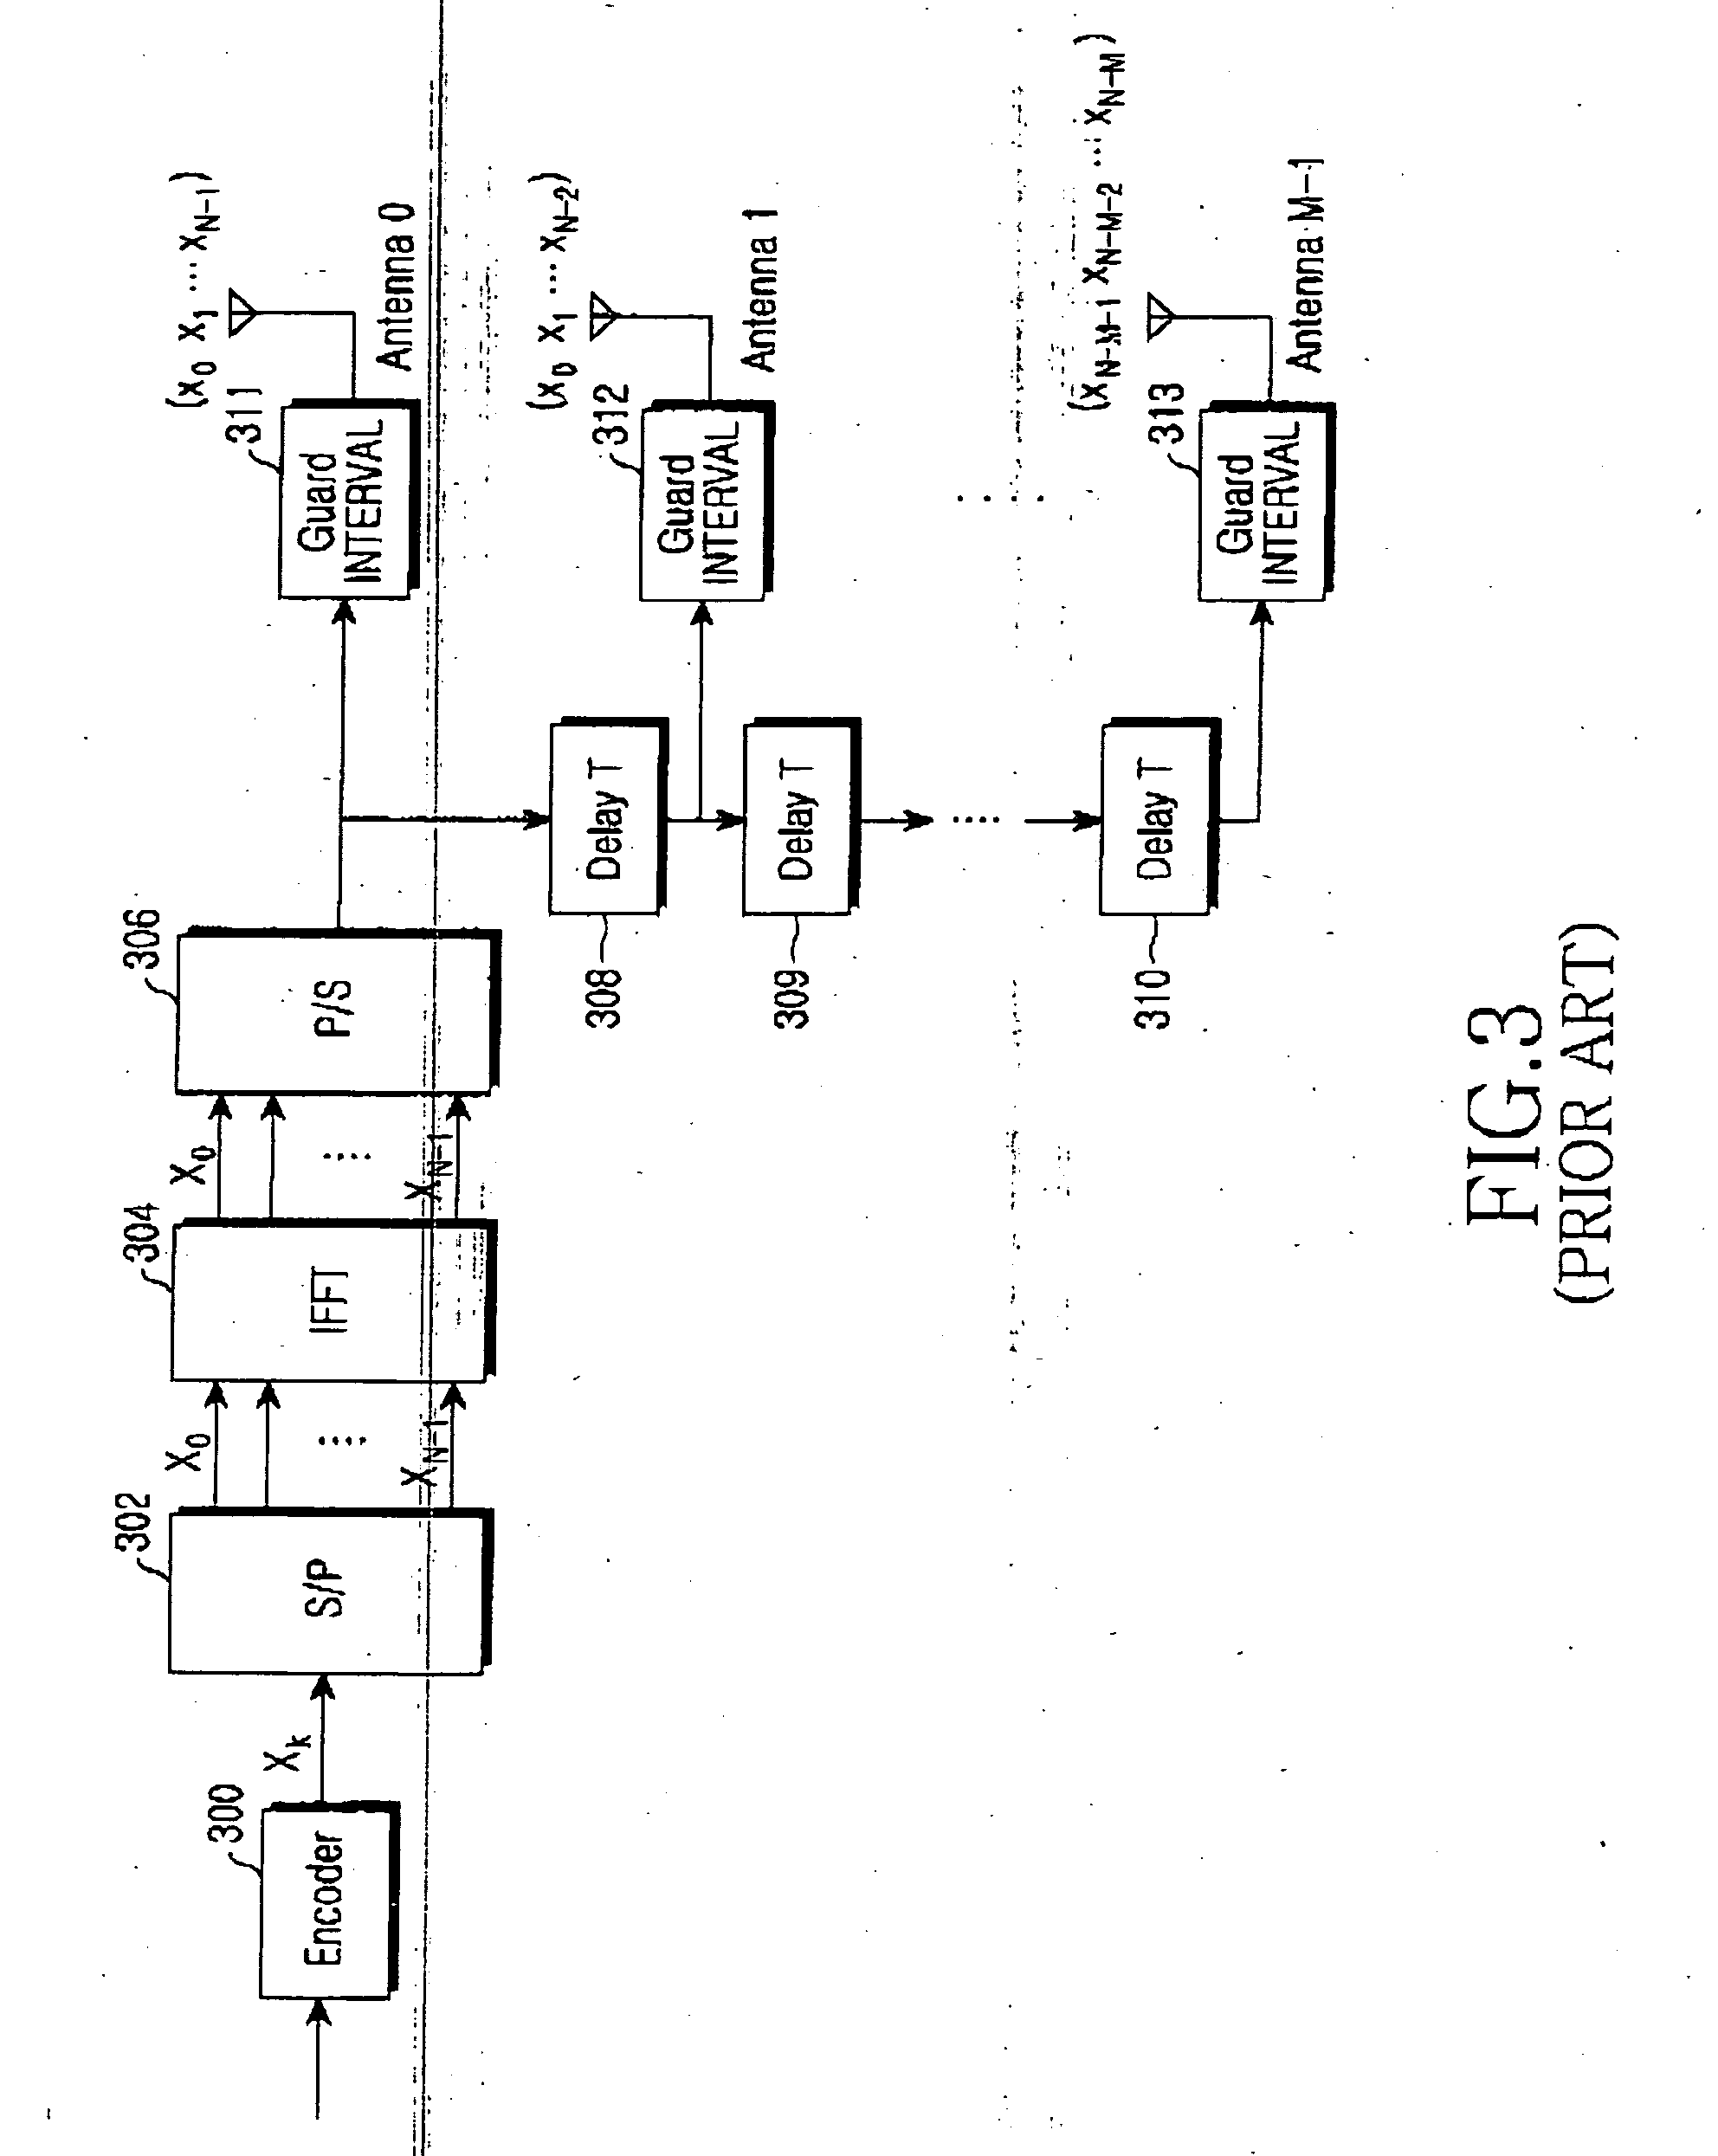 Gap filler apparatus and method for providing cyclic delay diversity in a digital multimedia broadcasting system, and broadcasting relay network using the same